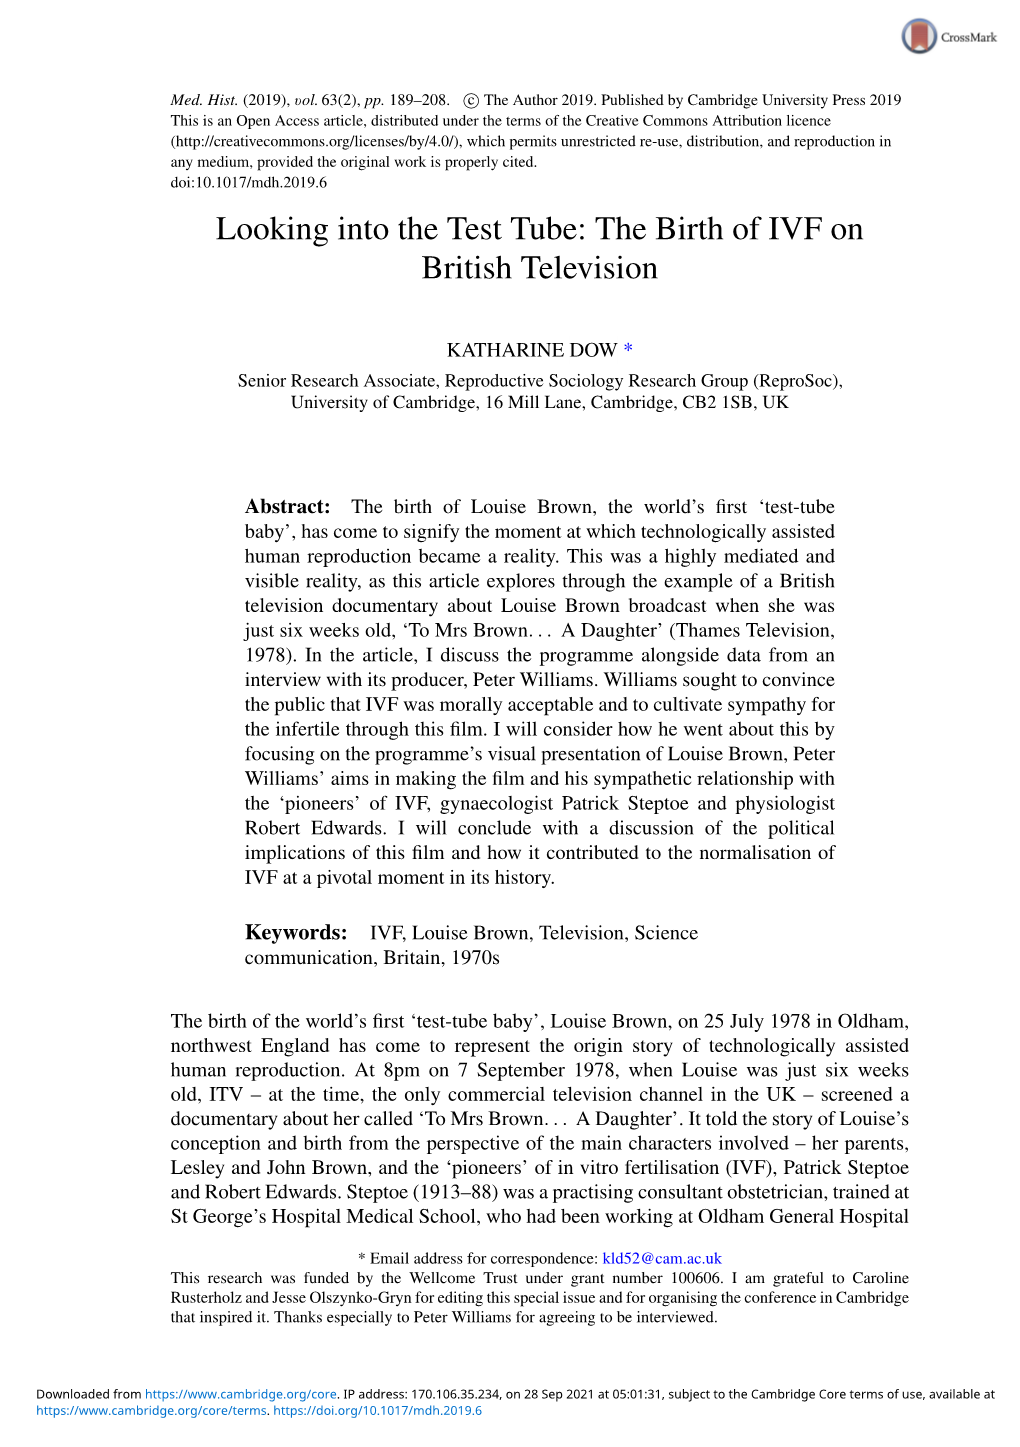 Looking Into the Test Tube: the Birth of IVF on British Television